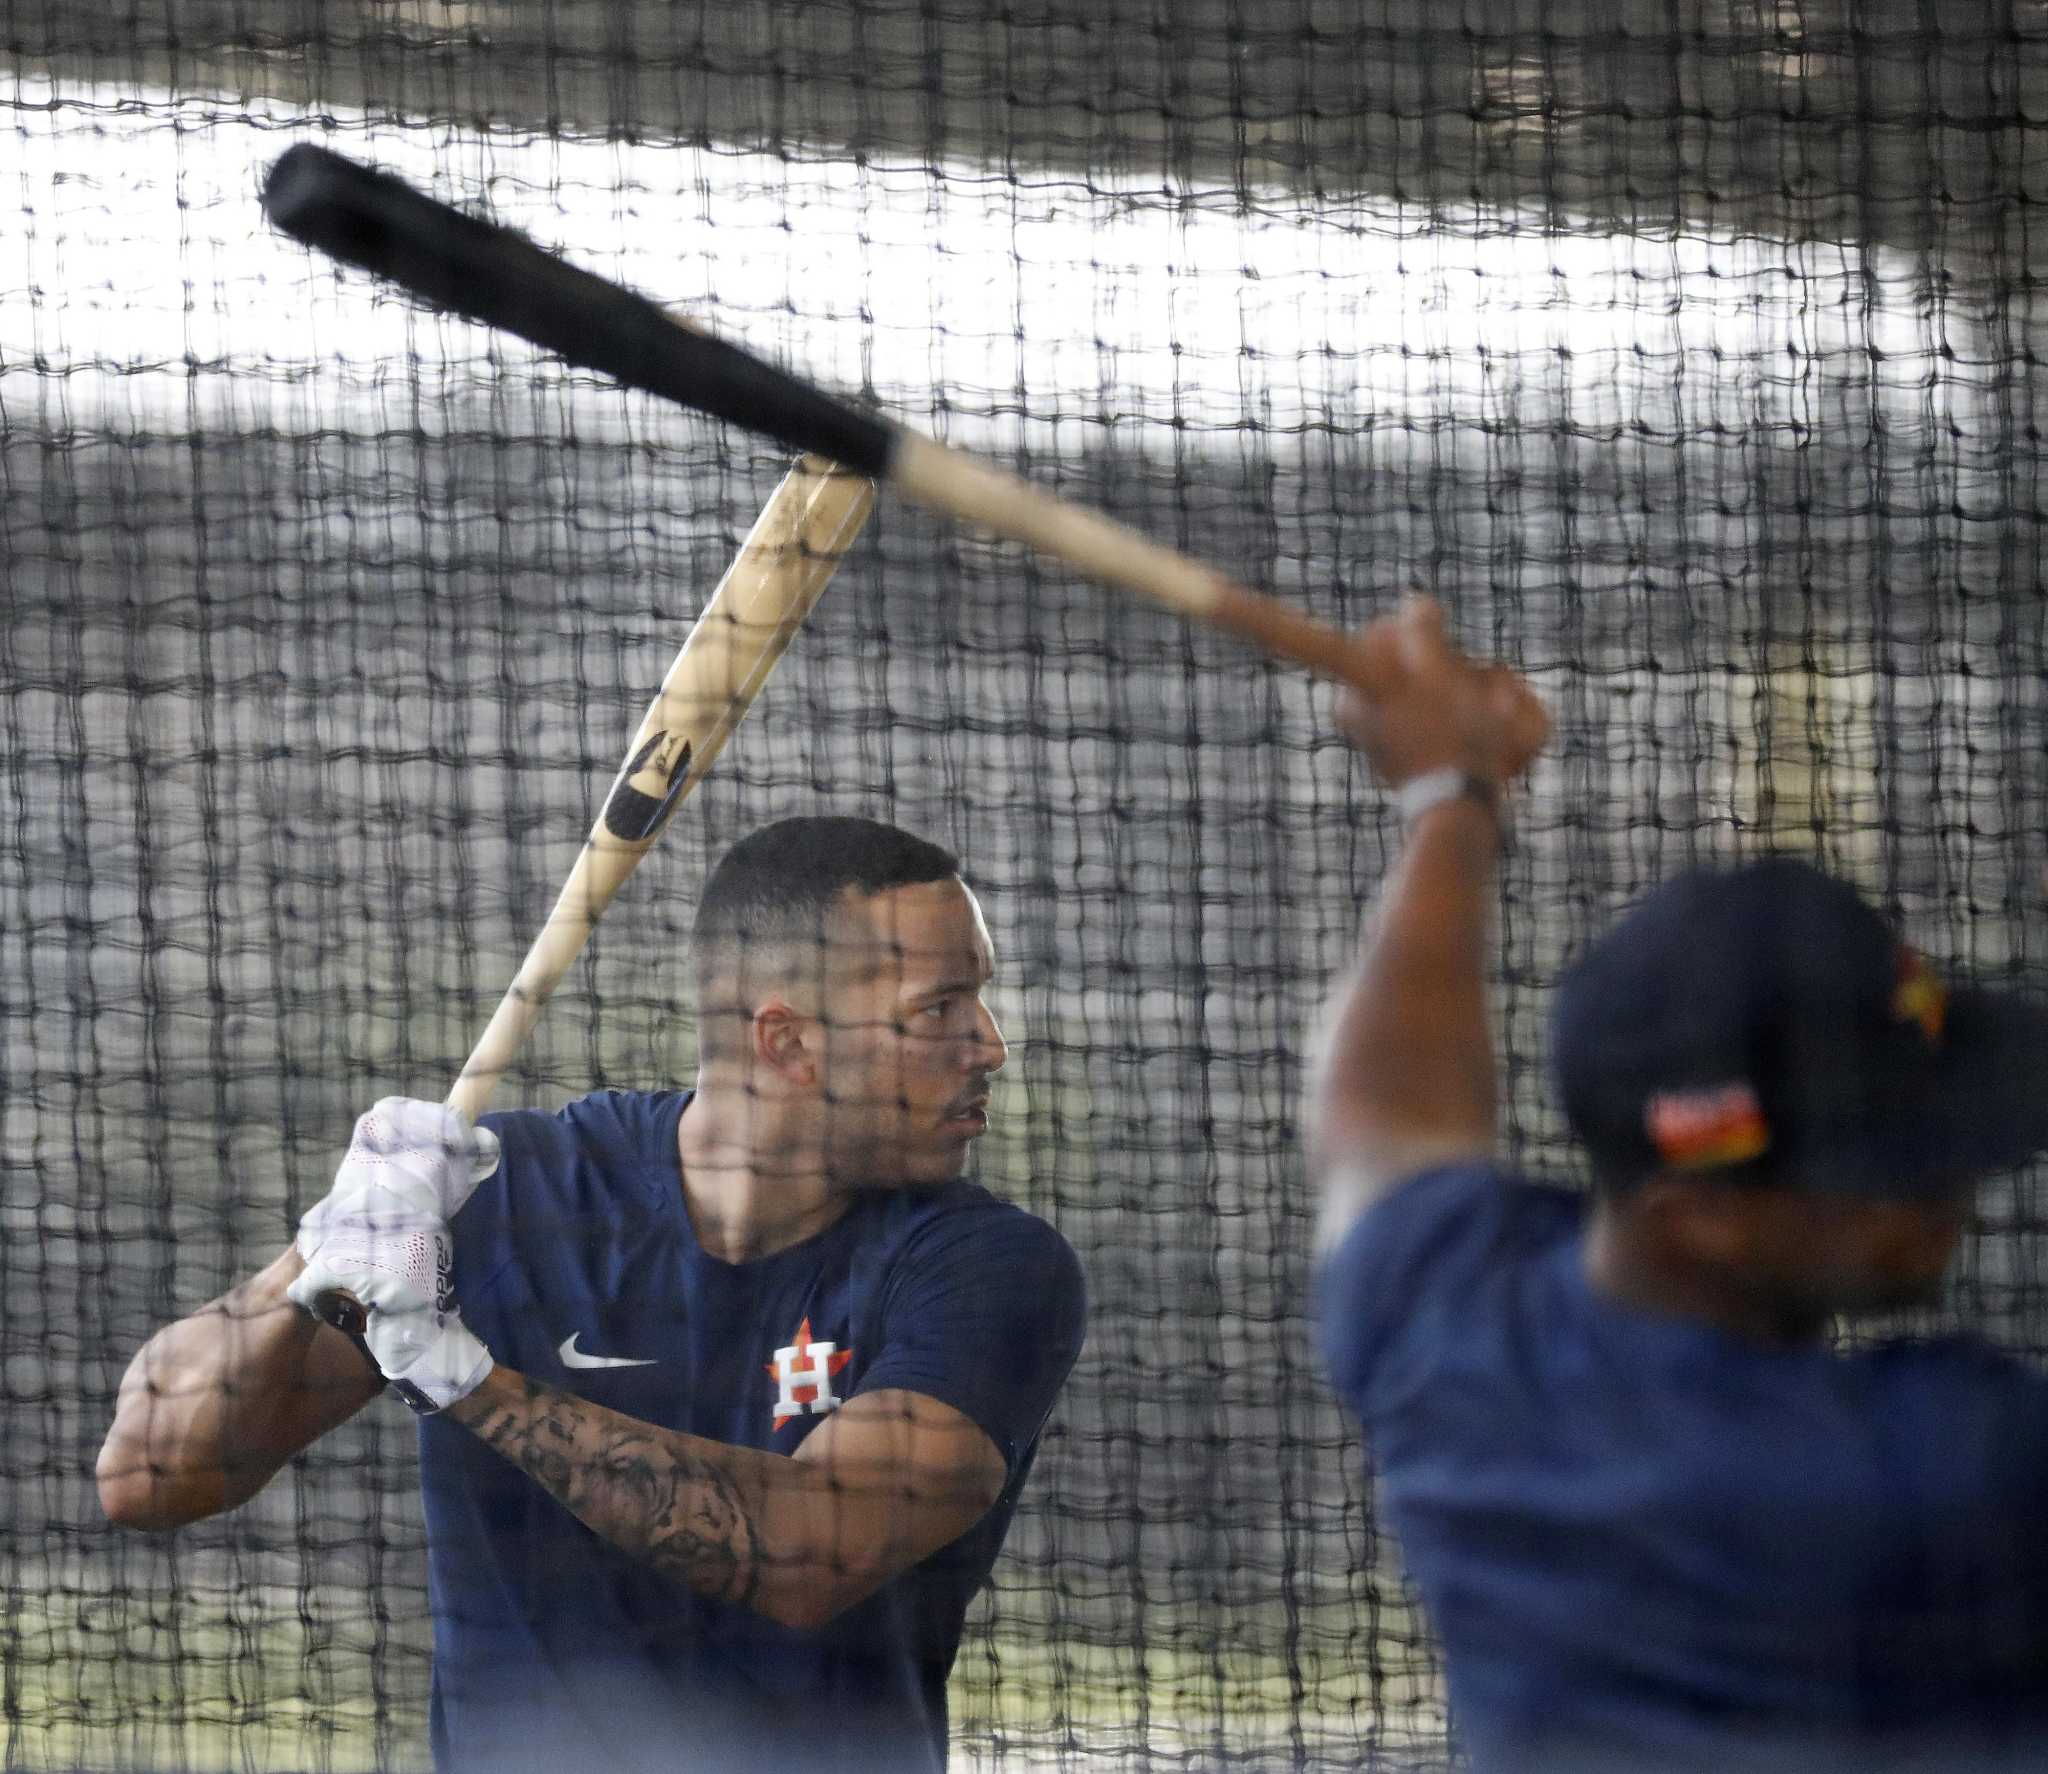 Astros' Jose Altuve shows off tattoo during spring training to back Carlos  Correa's claims 